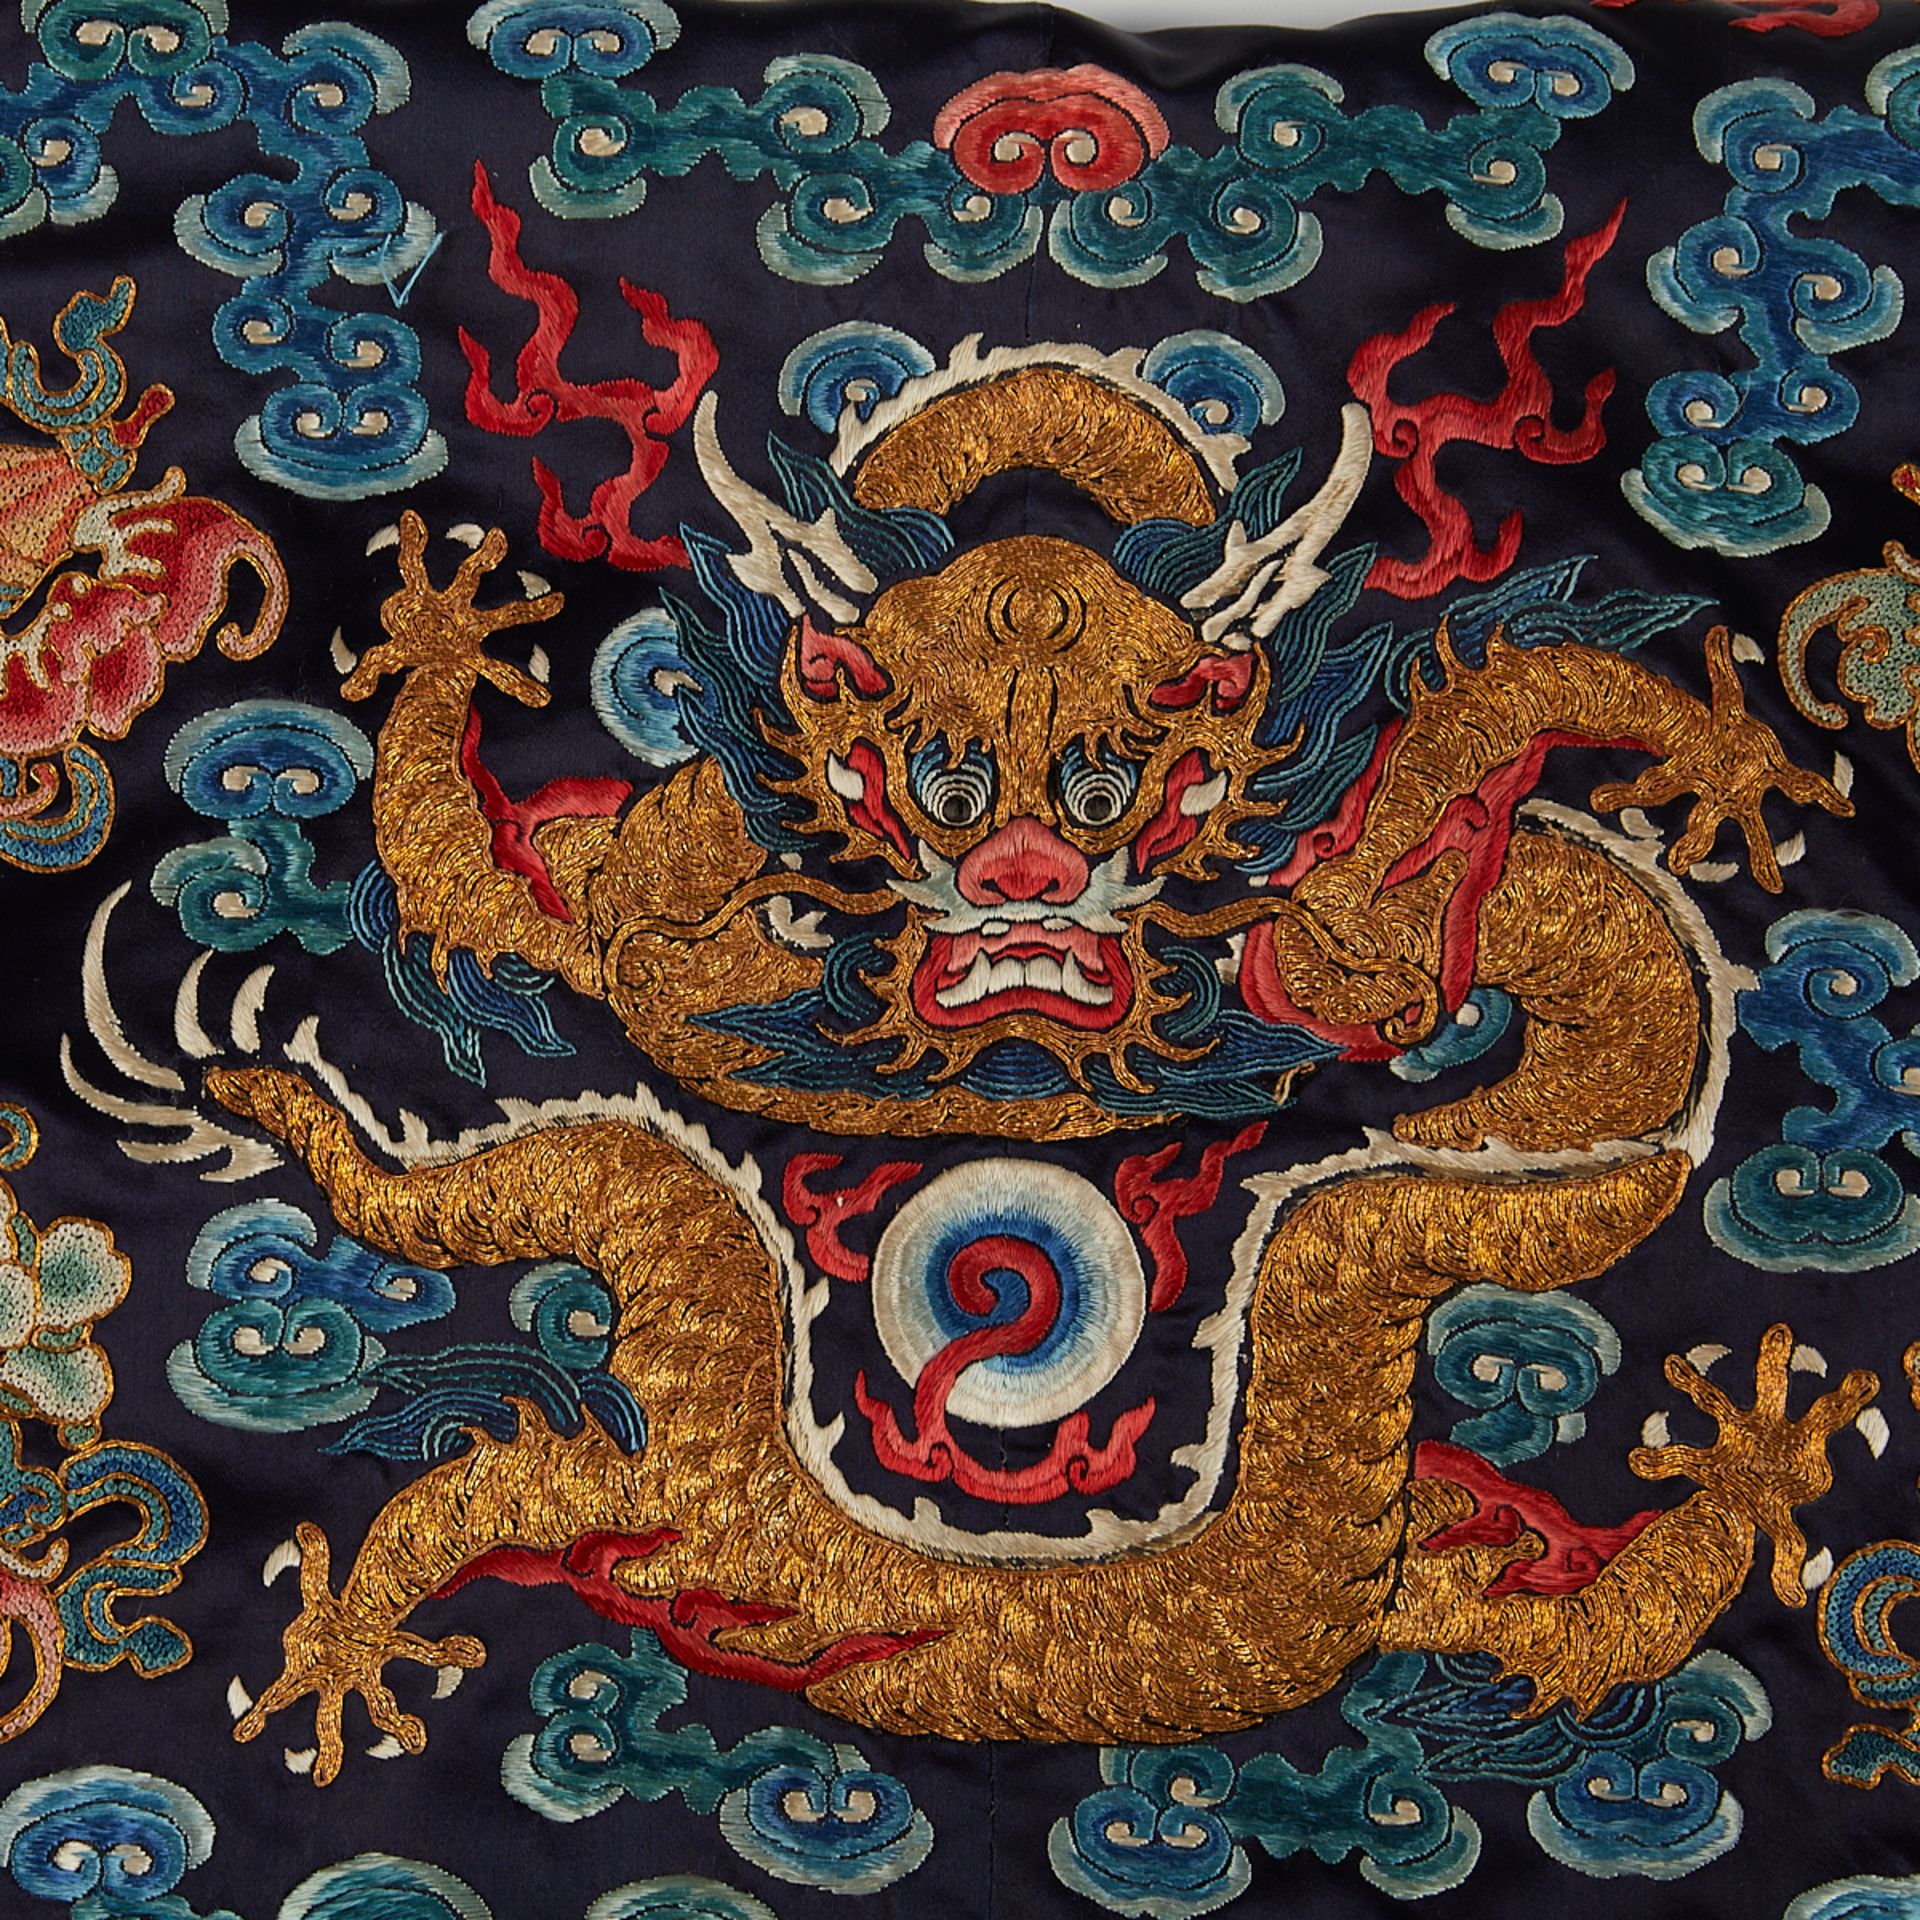 19th c. Chinese Embroidered Silk Dragon Robe - Image 5 of 9